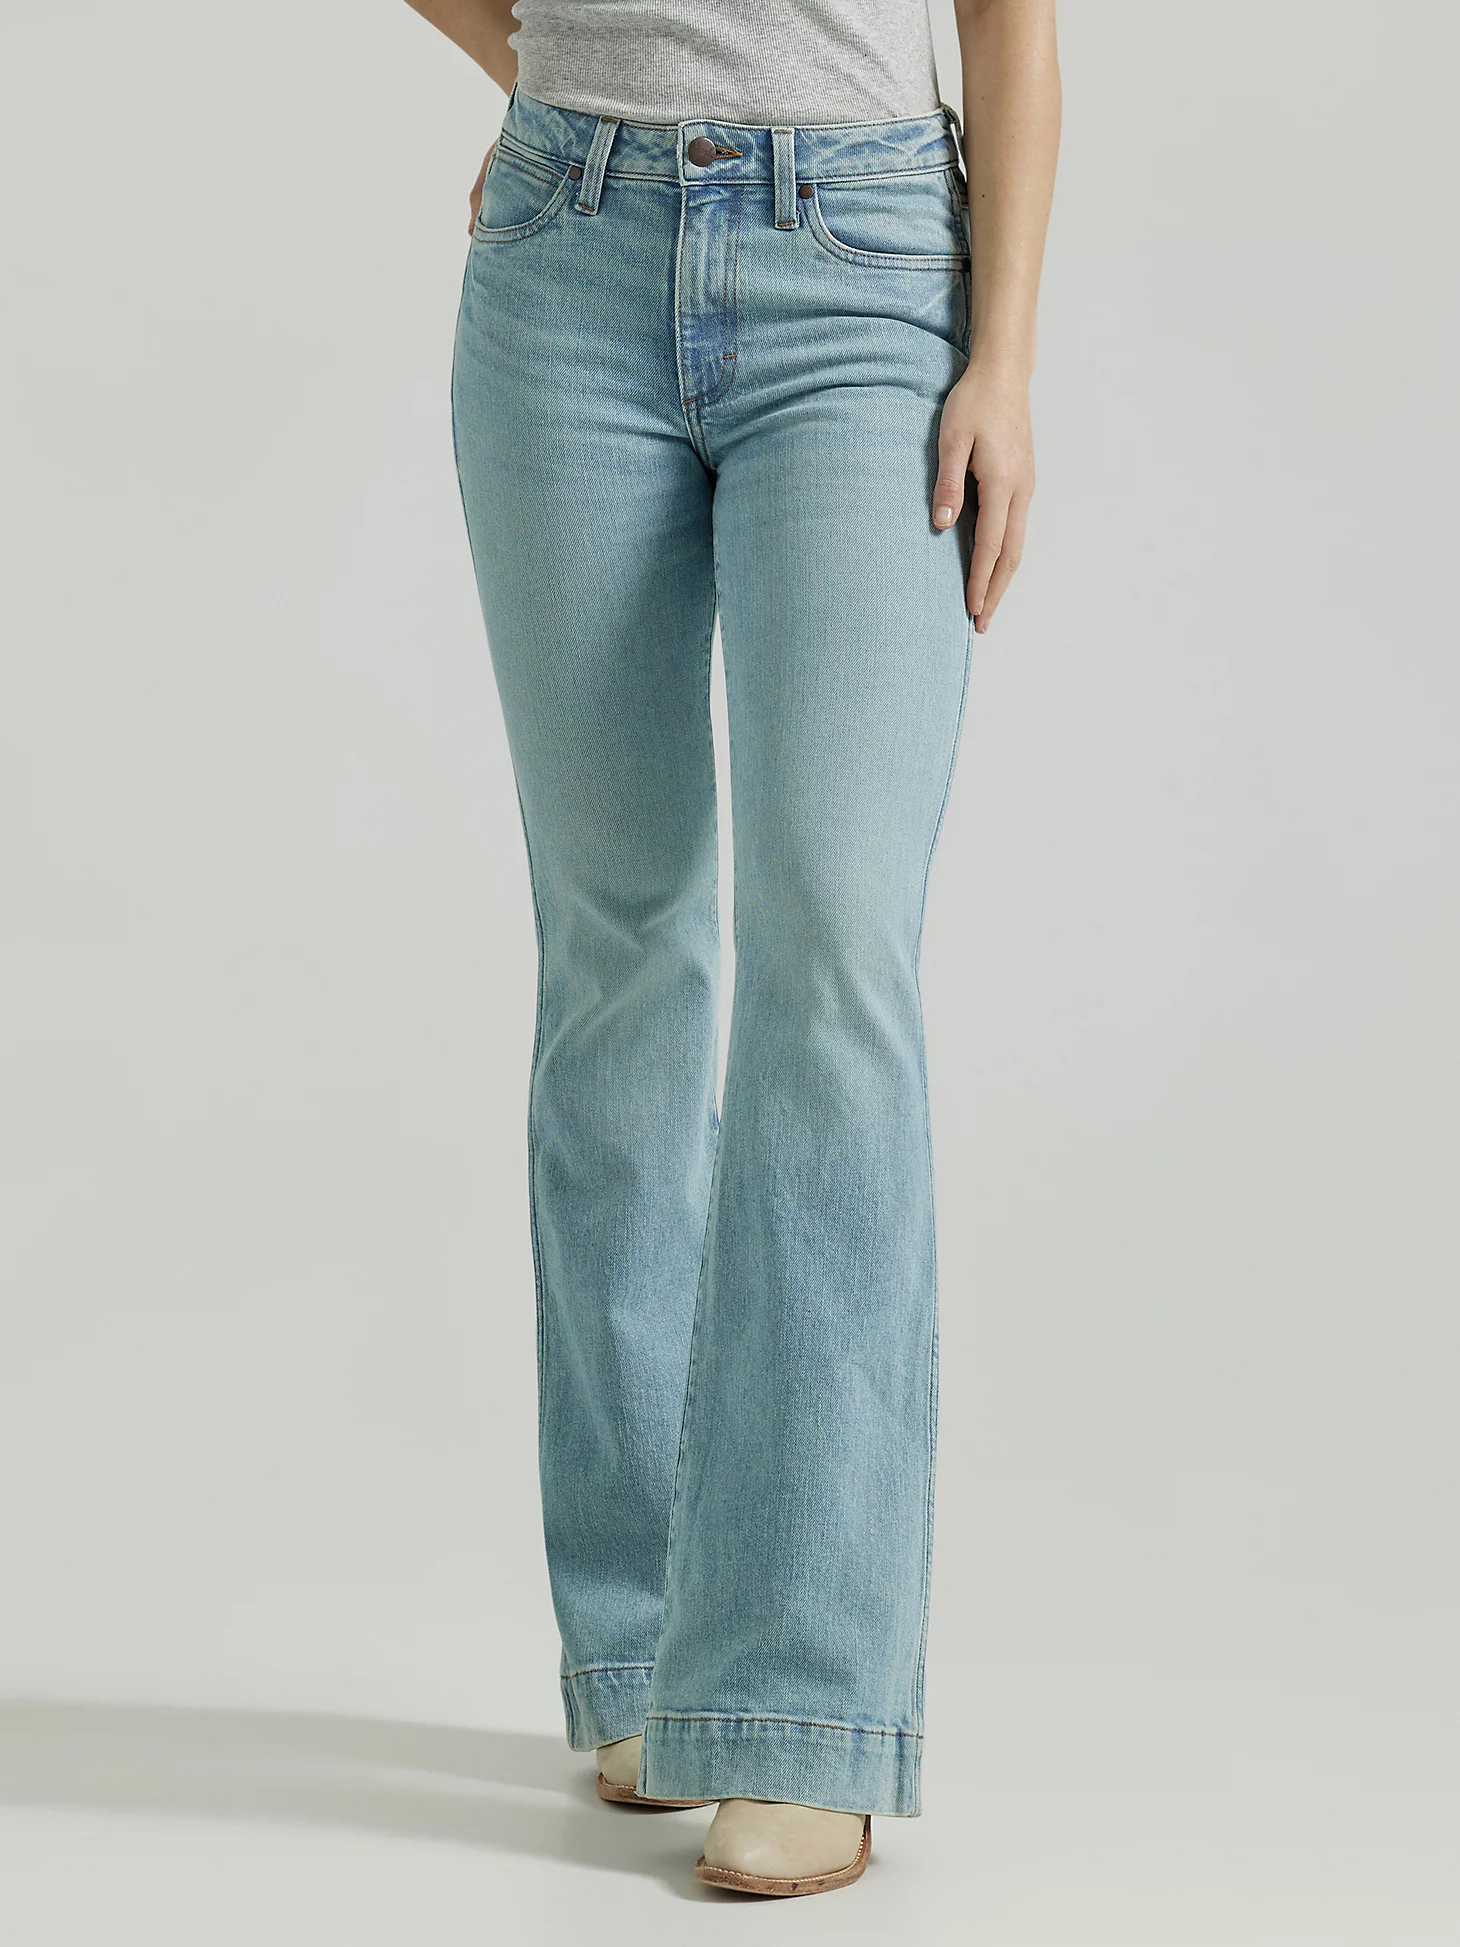 HIGH RISE LIGHT WASH TROUSER JEANS